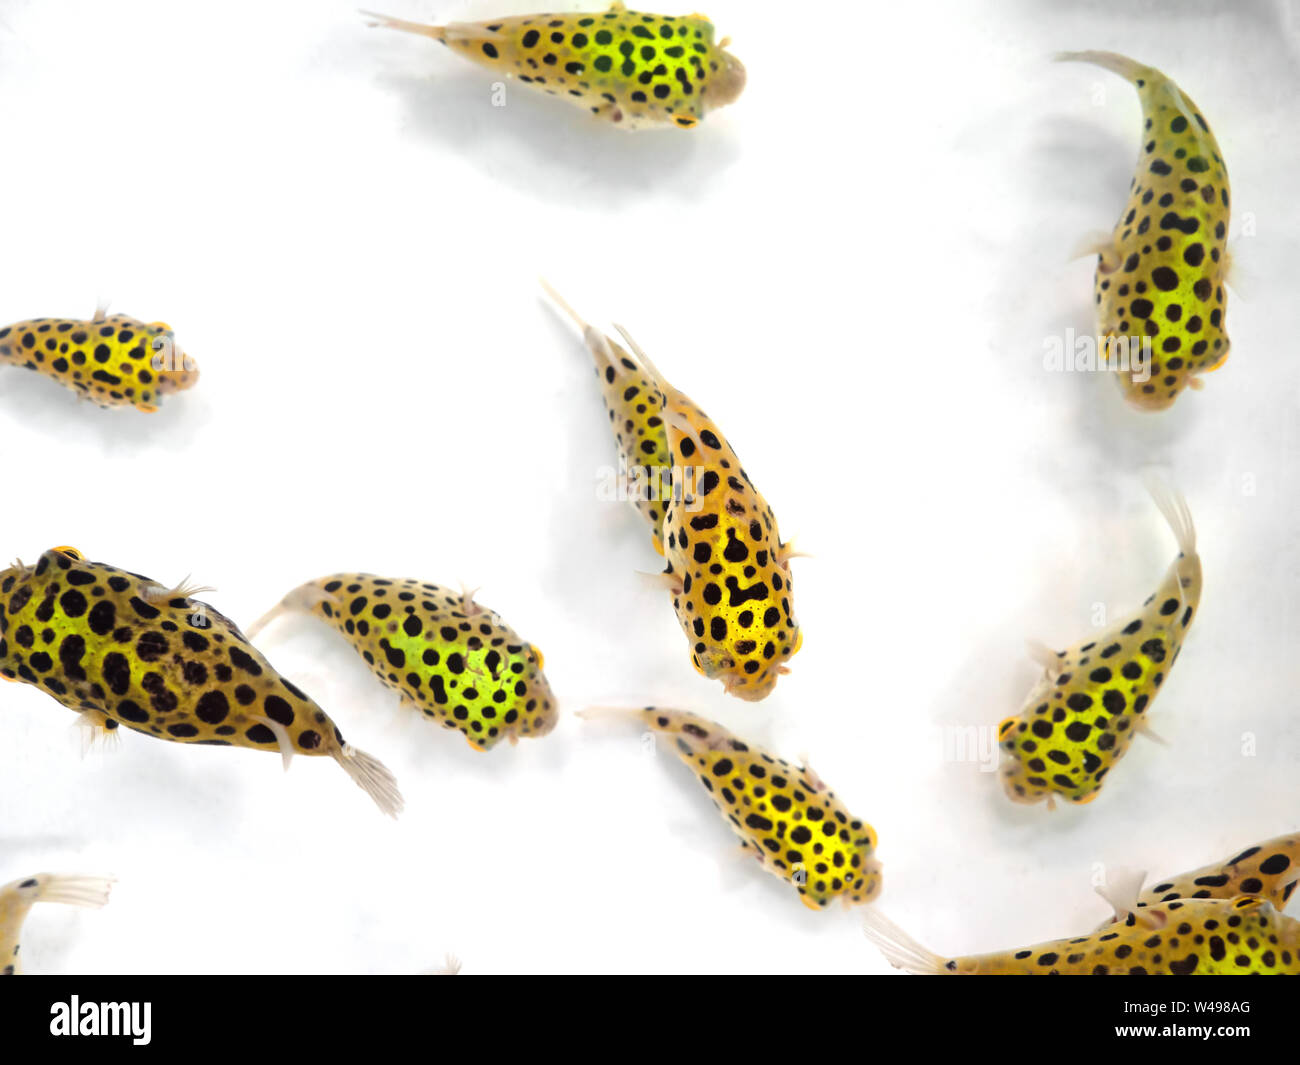 Closeup Group of Green Spotted Puffer Fish Isolated on White Background Stock Photo